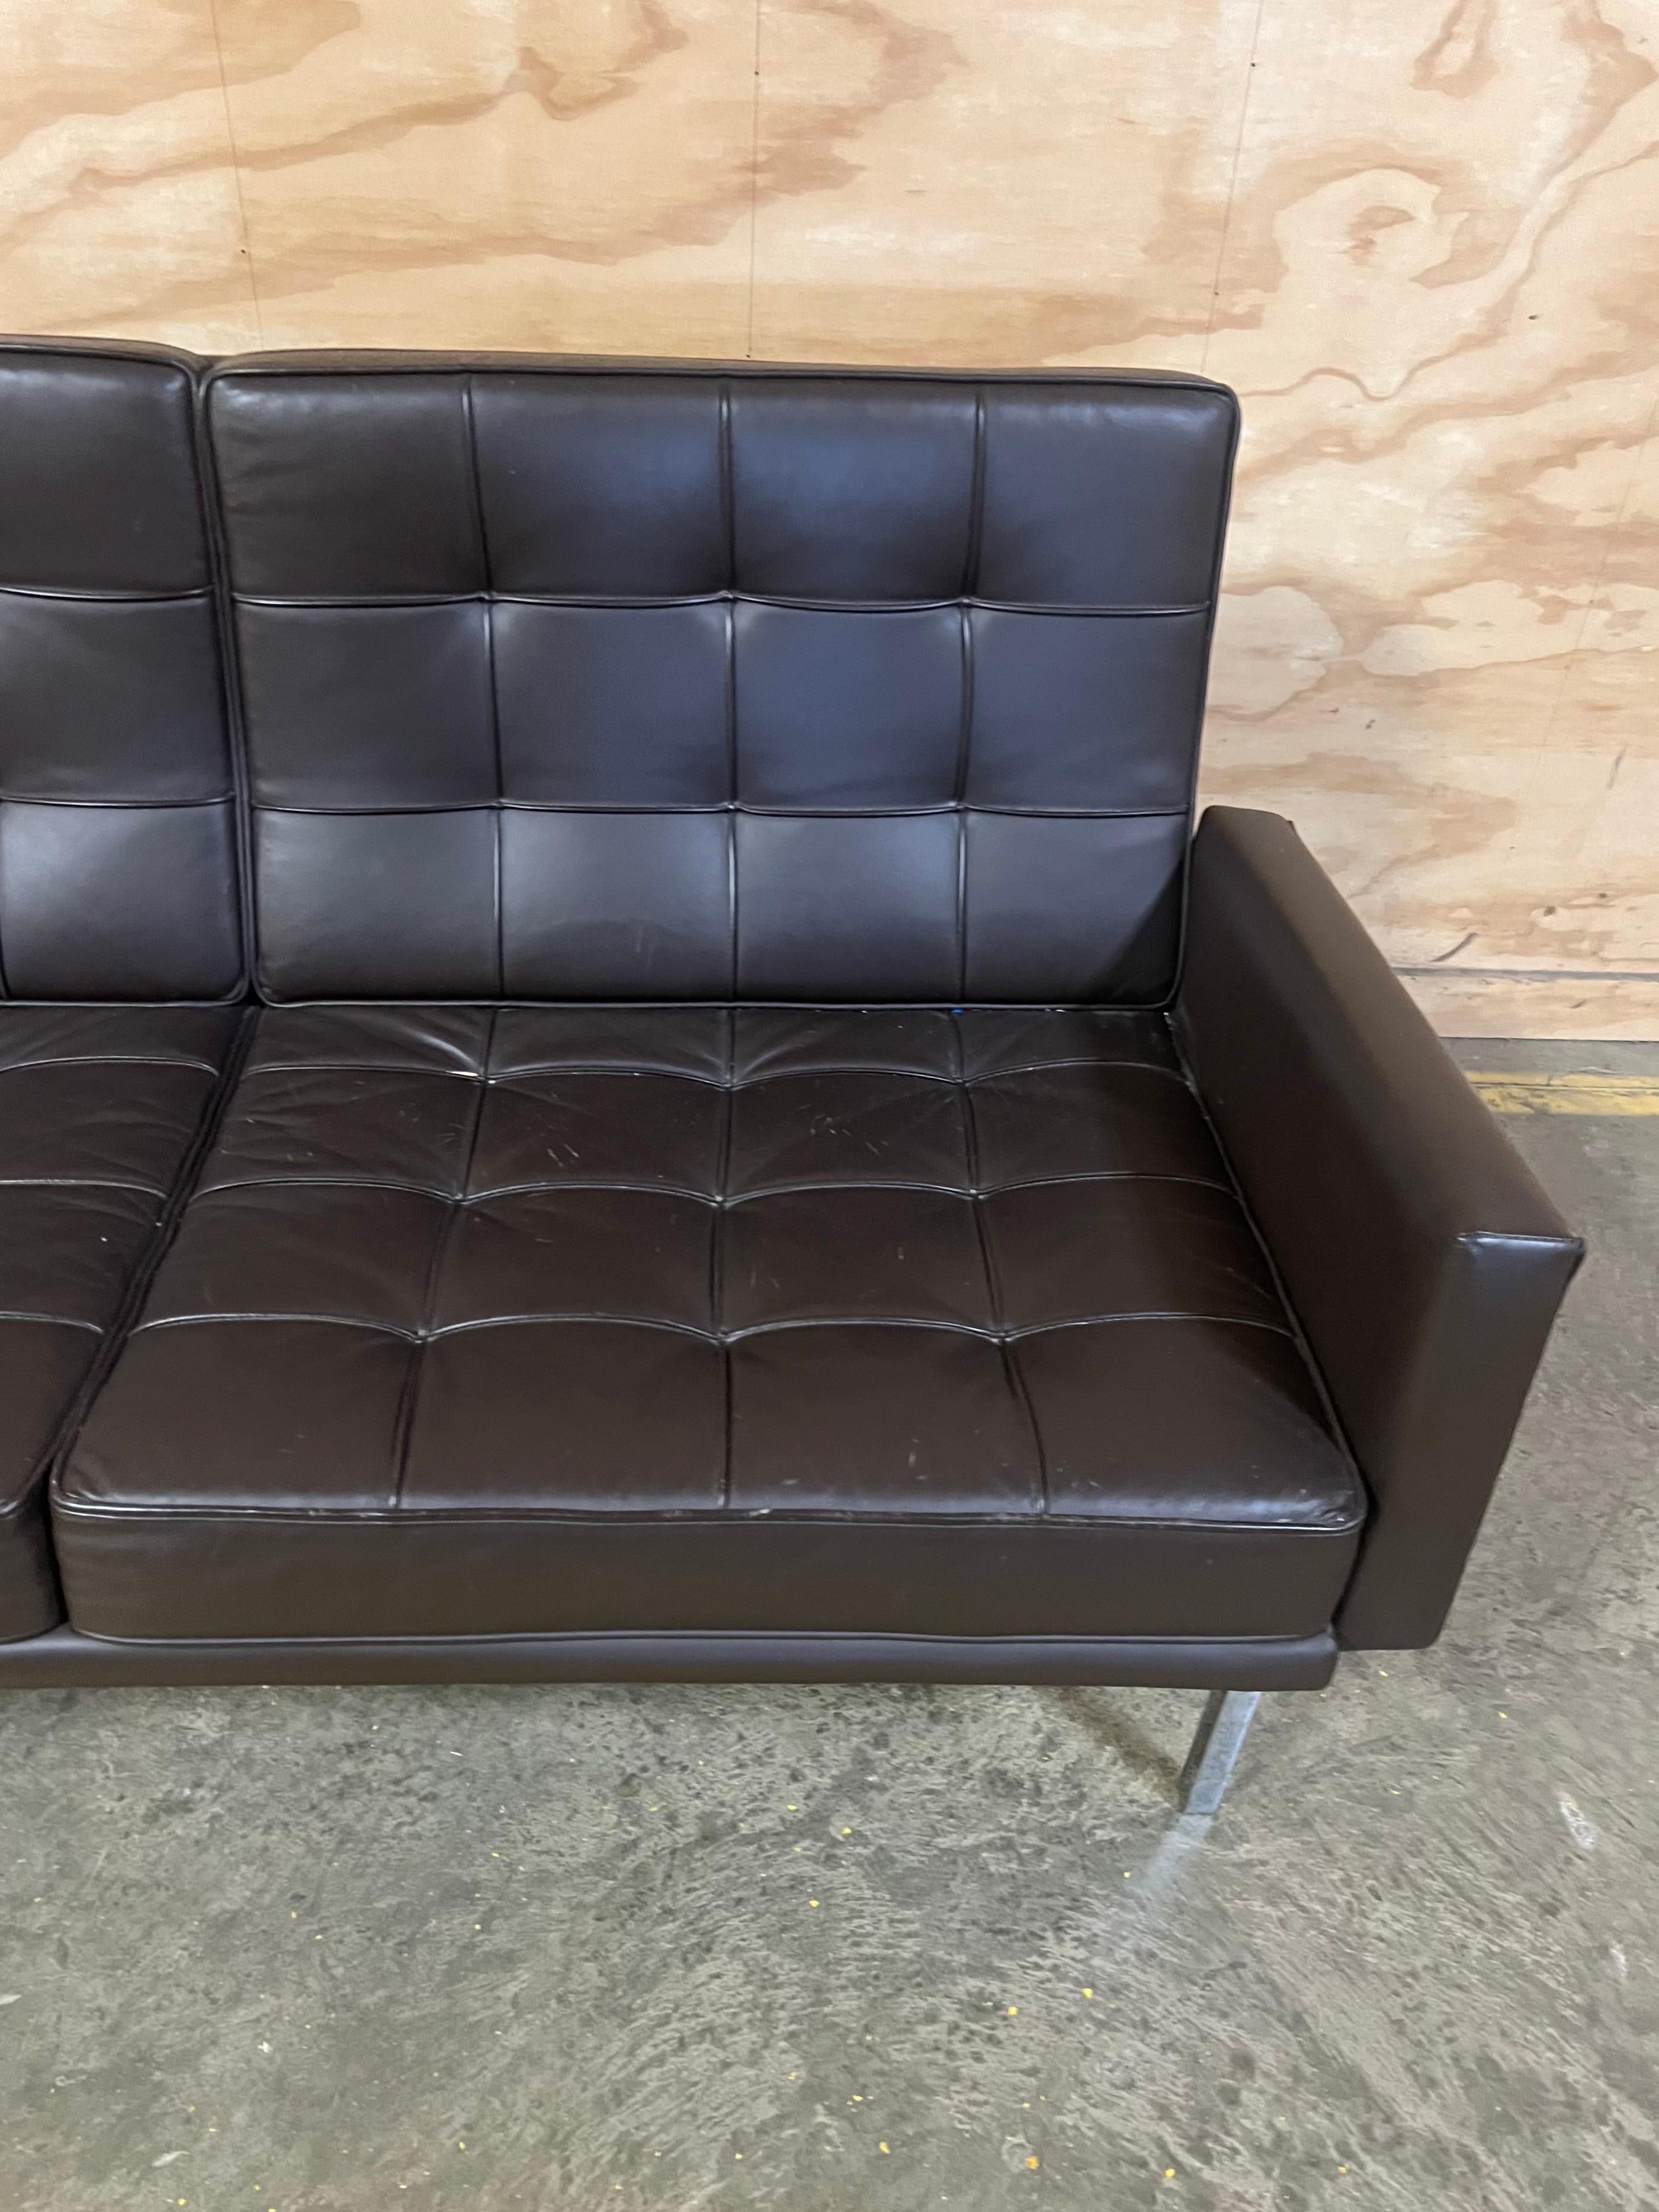 Florence Knoll Brown Sofa ~ Modell 2577 im Zustand „Gut“ im Angebot in New York, NY